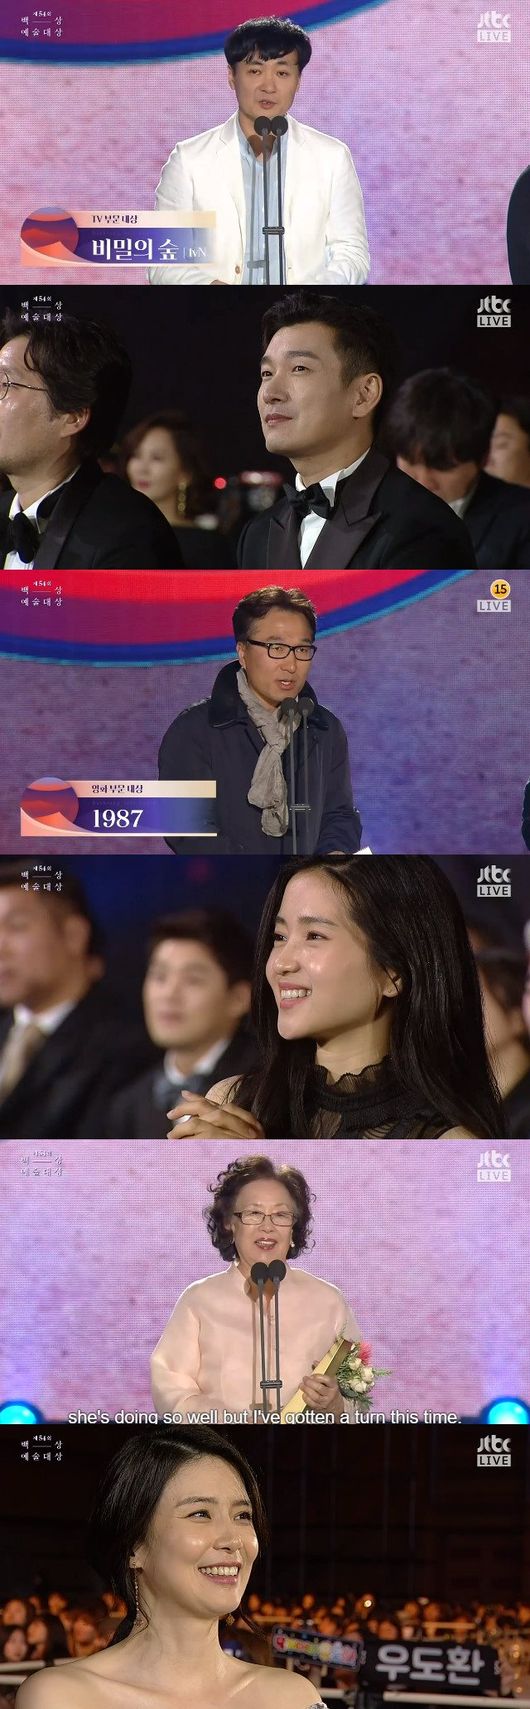 The movie 1987 and the TVN drama Secret Forest were honored with the honor of the white prize.The 54th Baeksang Arts Awards ceremony held at COEX D Hall in Samseong-dong, Gangnam-gu, Seoul on March 3 was held at the Honor of the two works, which received attention due to social significance. The awards ceremony was held at the TV and movie awards ceremony. The author Kim Eun-sook conducted the project.I think I have been in the studio for the past year after receiving this award, he said of Honor and burden, and called the secret forest.The representative of the production company of Secret Forest and PD expressed their feelings and vowed to make a lot of good works that are socially meaningful in the future.Director Jang Jun-hwan of 1987, which deals with the true story of Park Jong-cheols death case, said, It is impressive.The director is lucky to meet good actors and staff to make good works, but the biggest luck is to meet good stories. This is a beautiful story made by the people themselves.In 2017, he also made a beautiful story with candles.I want to share this Honor with the people. The production team also said, I am grateful to the audience who loved our movie, including President Moon Jae-in.I was able to make this movie because there were the sacrifices that were sacrificed while fighting for the democracy of this land.I hope this movie will be a little comfort to them. Moreover, at the awards ceremony, the works with social meaning enjoyed the joy of winning the prize, and the meaningful thoughts of the stars continued to attract attention.Kim Yoon-seok and Park Hee-soon, who received the Best Actor Award and Best Supporting Actor Award in the movie category for 1987, added that I think I received the award for everyone who appeared together. Na Moon-hee, who won the Best Actress Award in the movie category for the movie I Can Speak, said, I want to share this award with comfort women and all the grandmothers of the world.